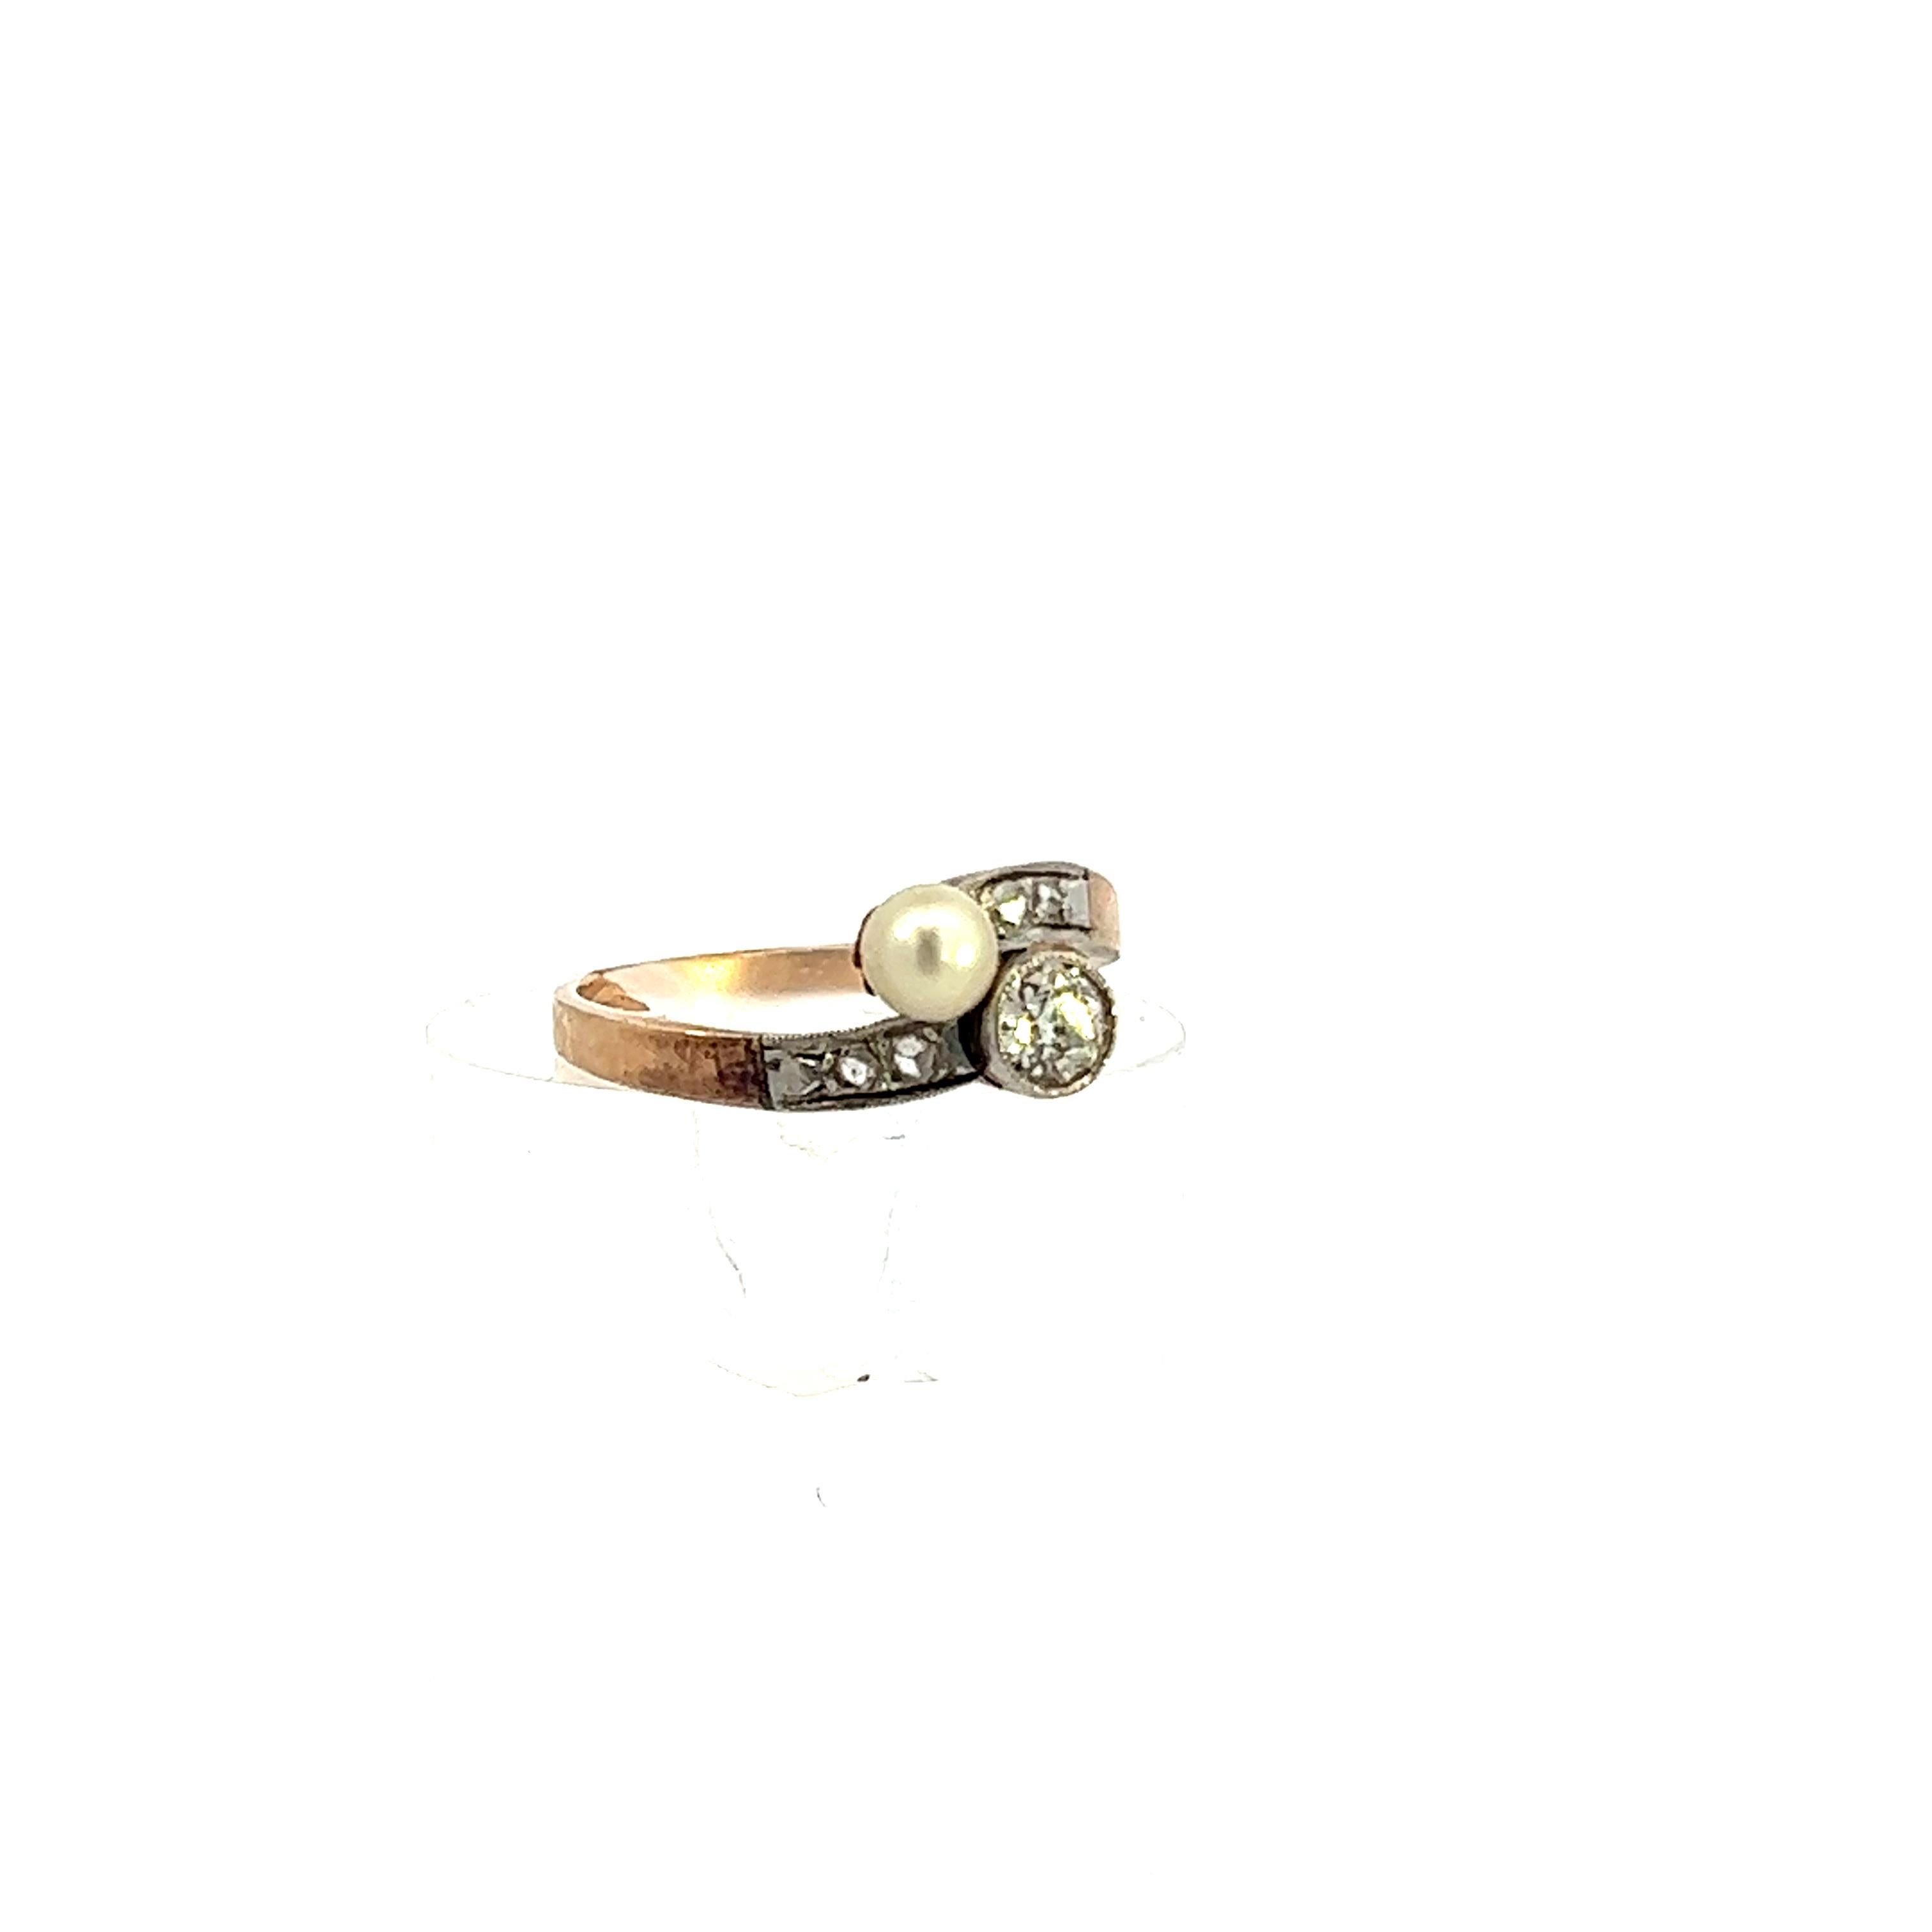 This is an Art Deco bypass ring from 1925, platinum over gold, featuring diamond and pearl. Being made in platinum over gold, this ring features a combination of benefits from both. The yellow making the band provides a beautiful tone contrasting